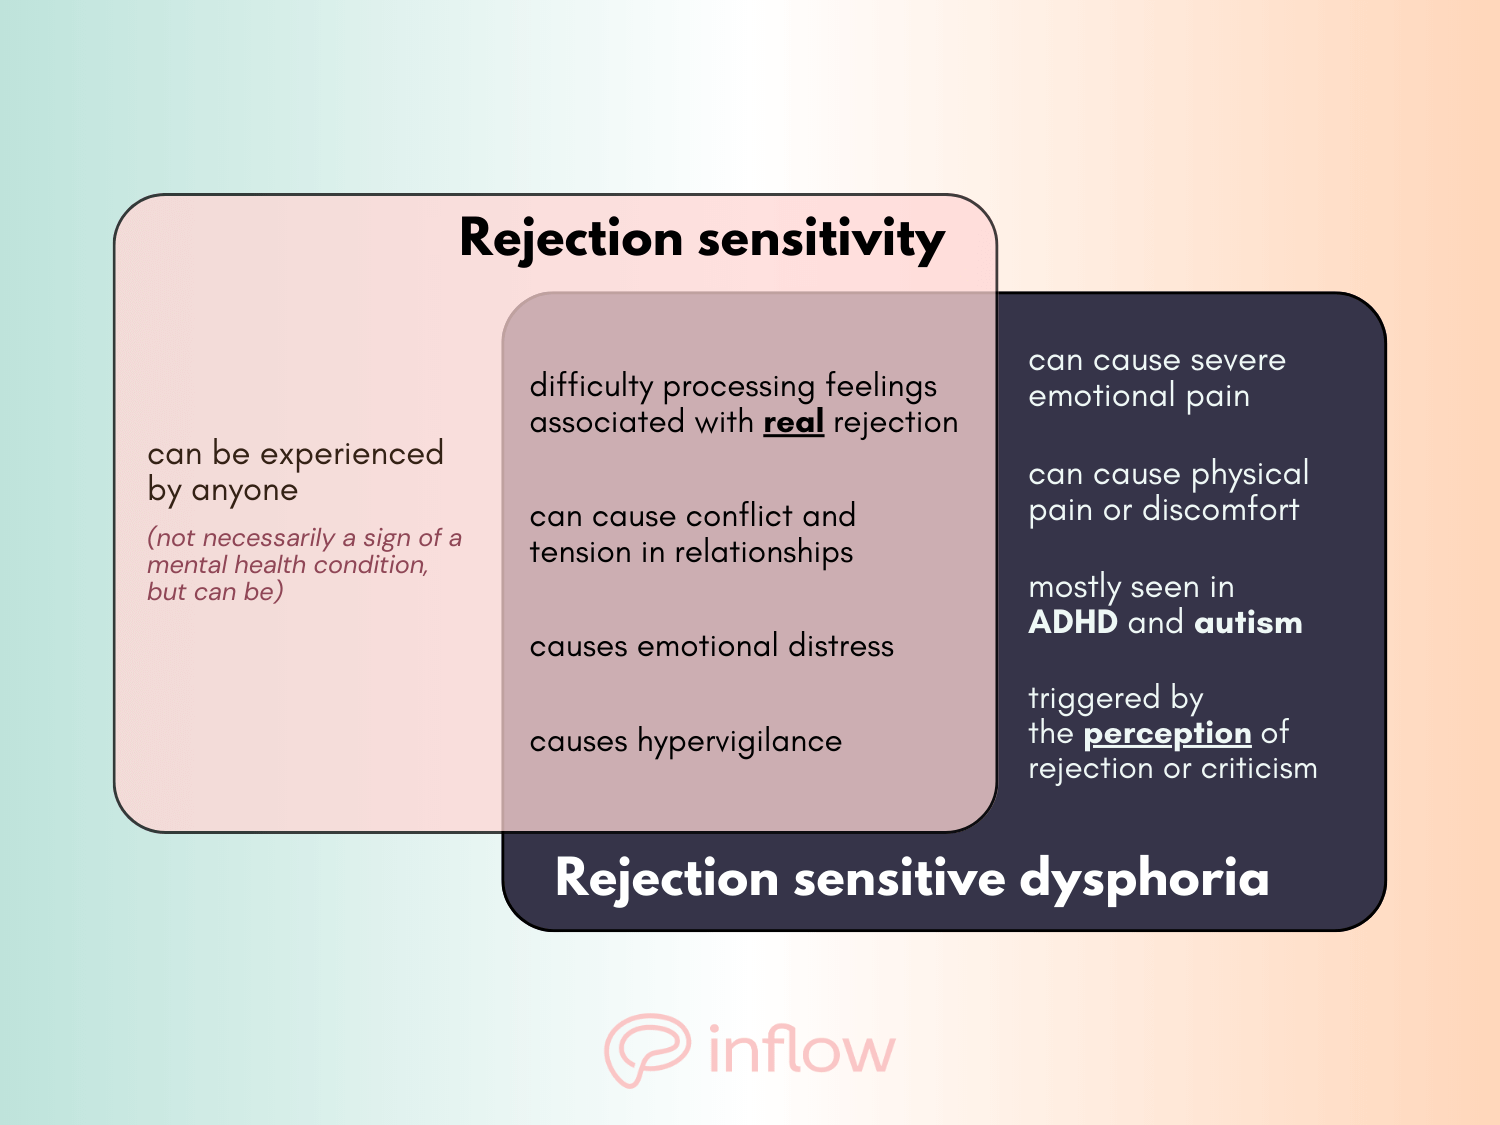 Box-shaped Venn diagram comparing rejection sensitivity and rejection sensitive dysphoria. On the rejection sensitivity side only: can be experienced by anyone (not necessarily a sign of a mental health condition, but can be). In the middle area: difficulty processing feelings associated with real rejection; can cause conflict and tension in relationships; causes emotional distress; causes hypervigilance. On the rejection sensitive dysphoria side only: can cause severe emotional pain; can cause physical pain or discomfort; mostly seen in ADHD and autism; triggered by the perception of rejection or criticism.